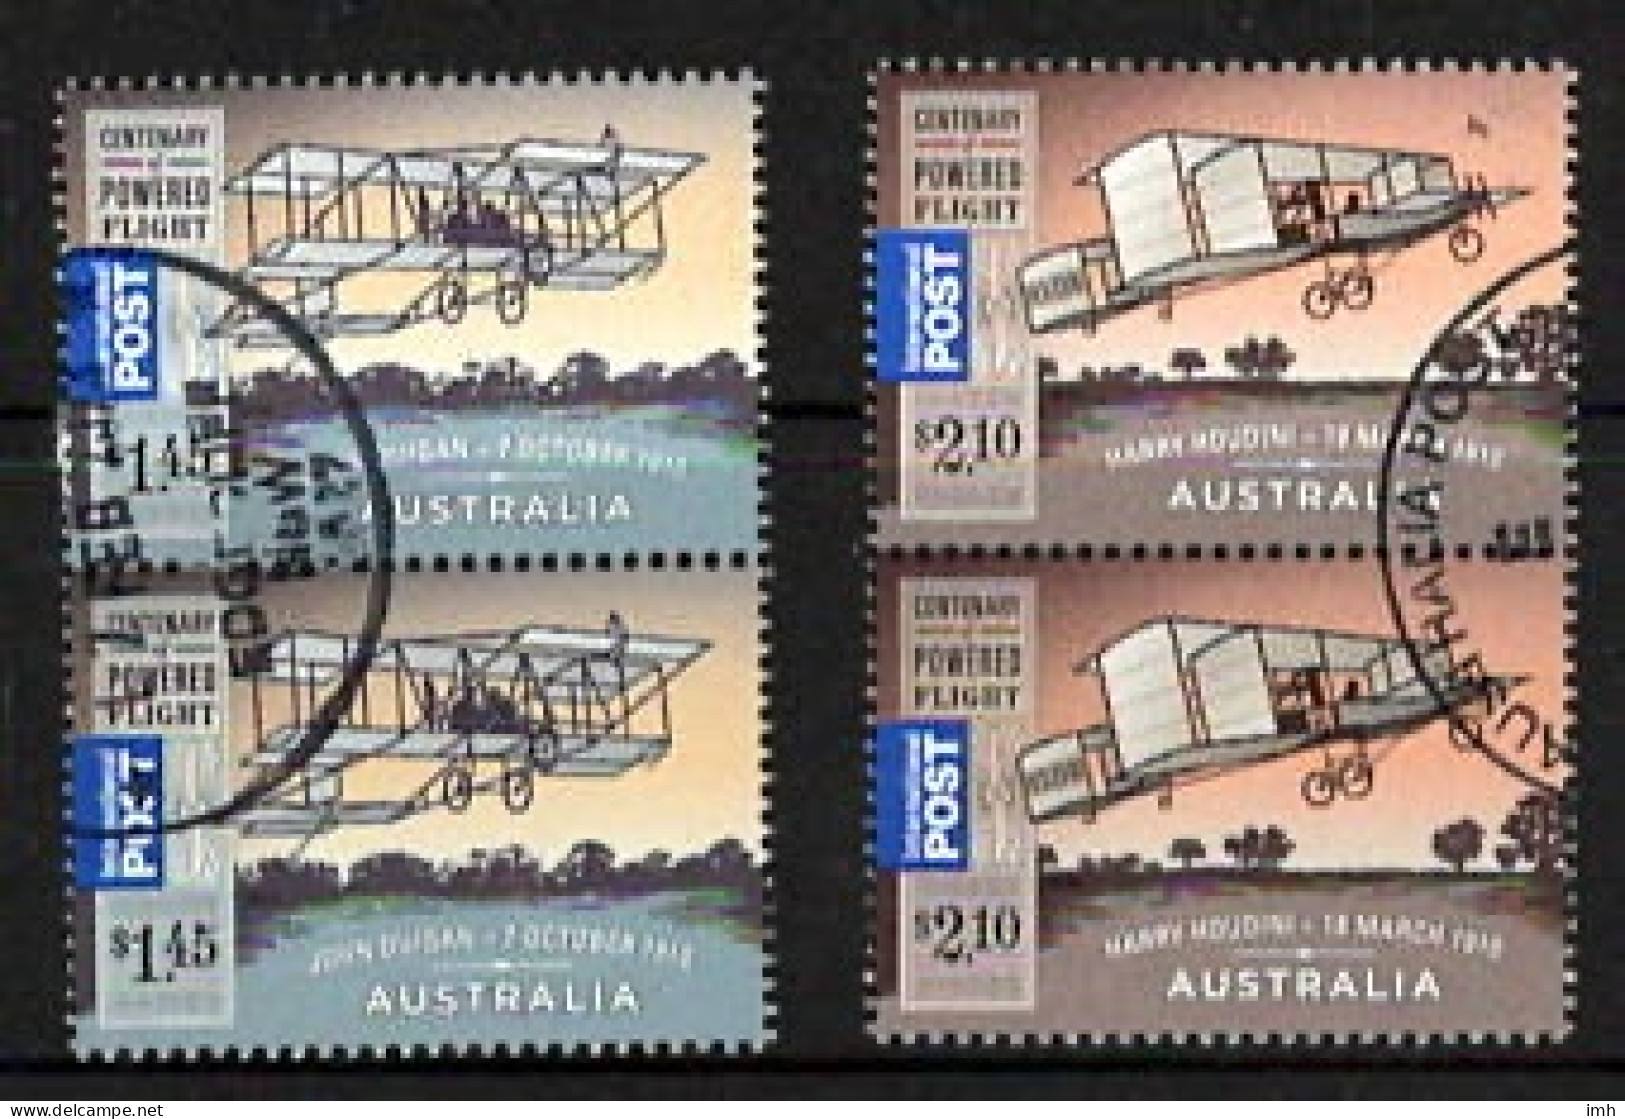 2010 Australia   Powered Flight, $1.45 And $2.10 Values In Used Pairs.   Fine Used. - Gebraucht